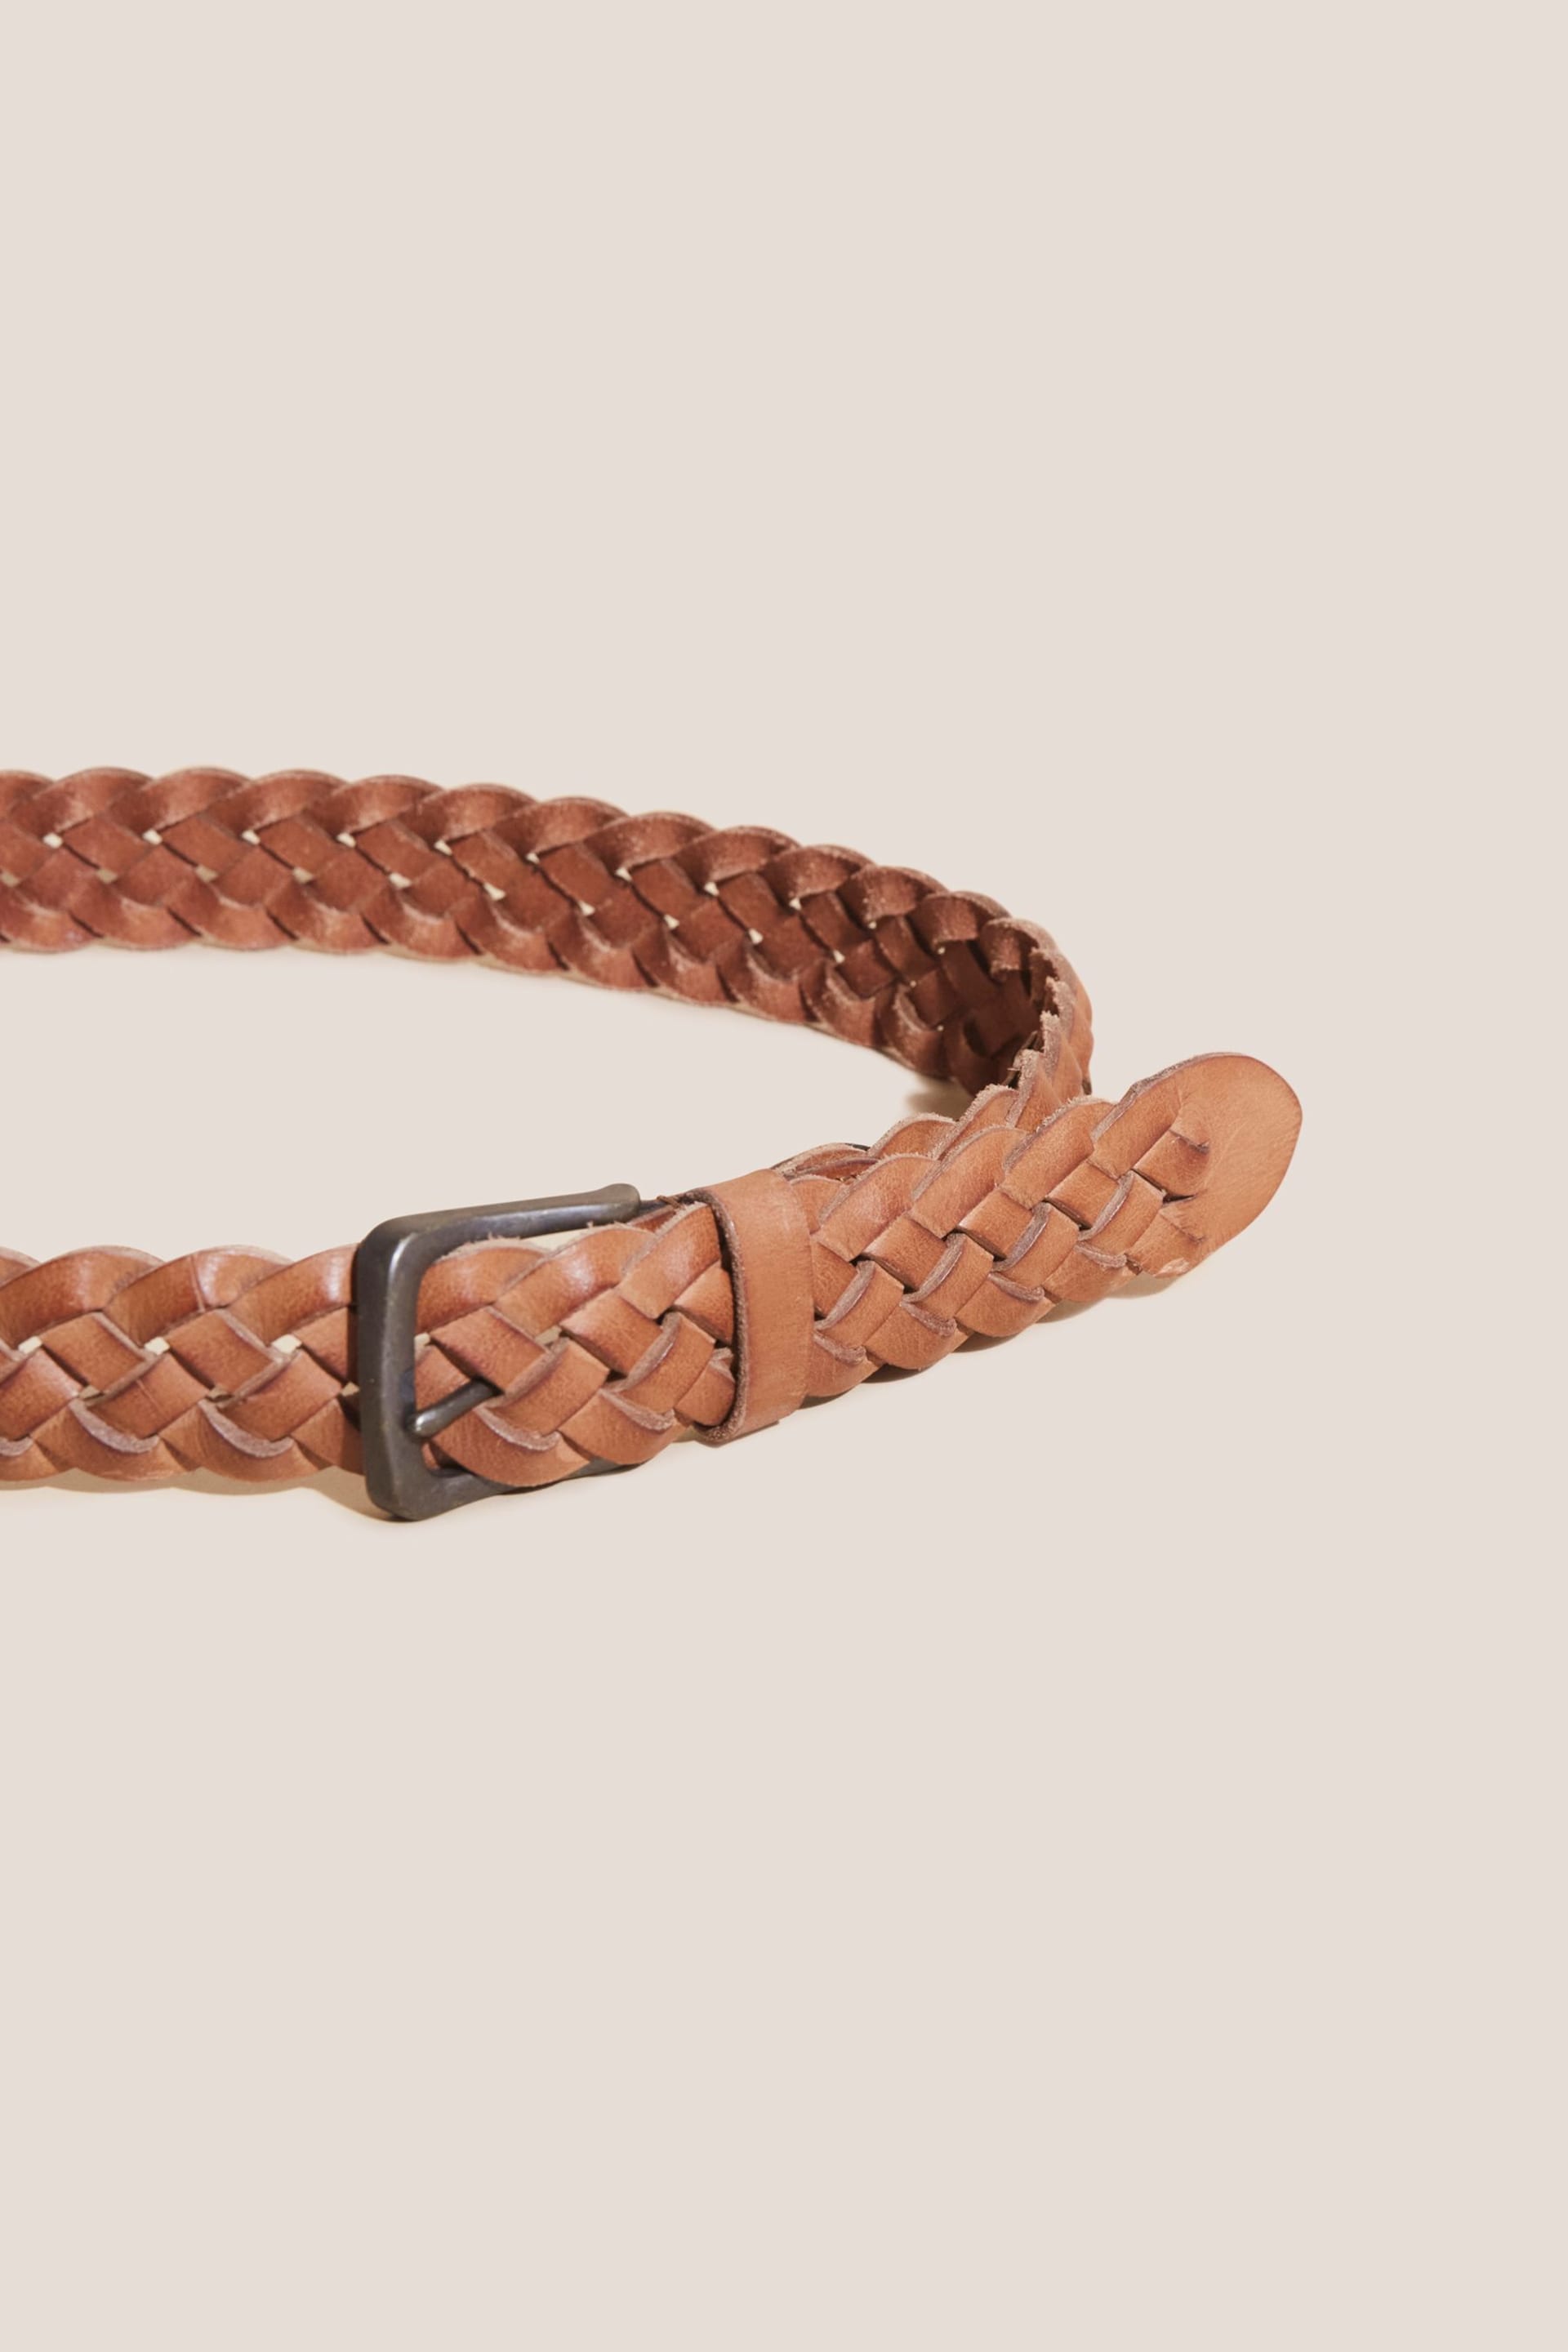 White Stuff Brown Weave Leather Belt - Image 2 of 2